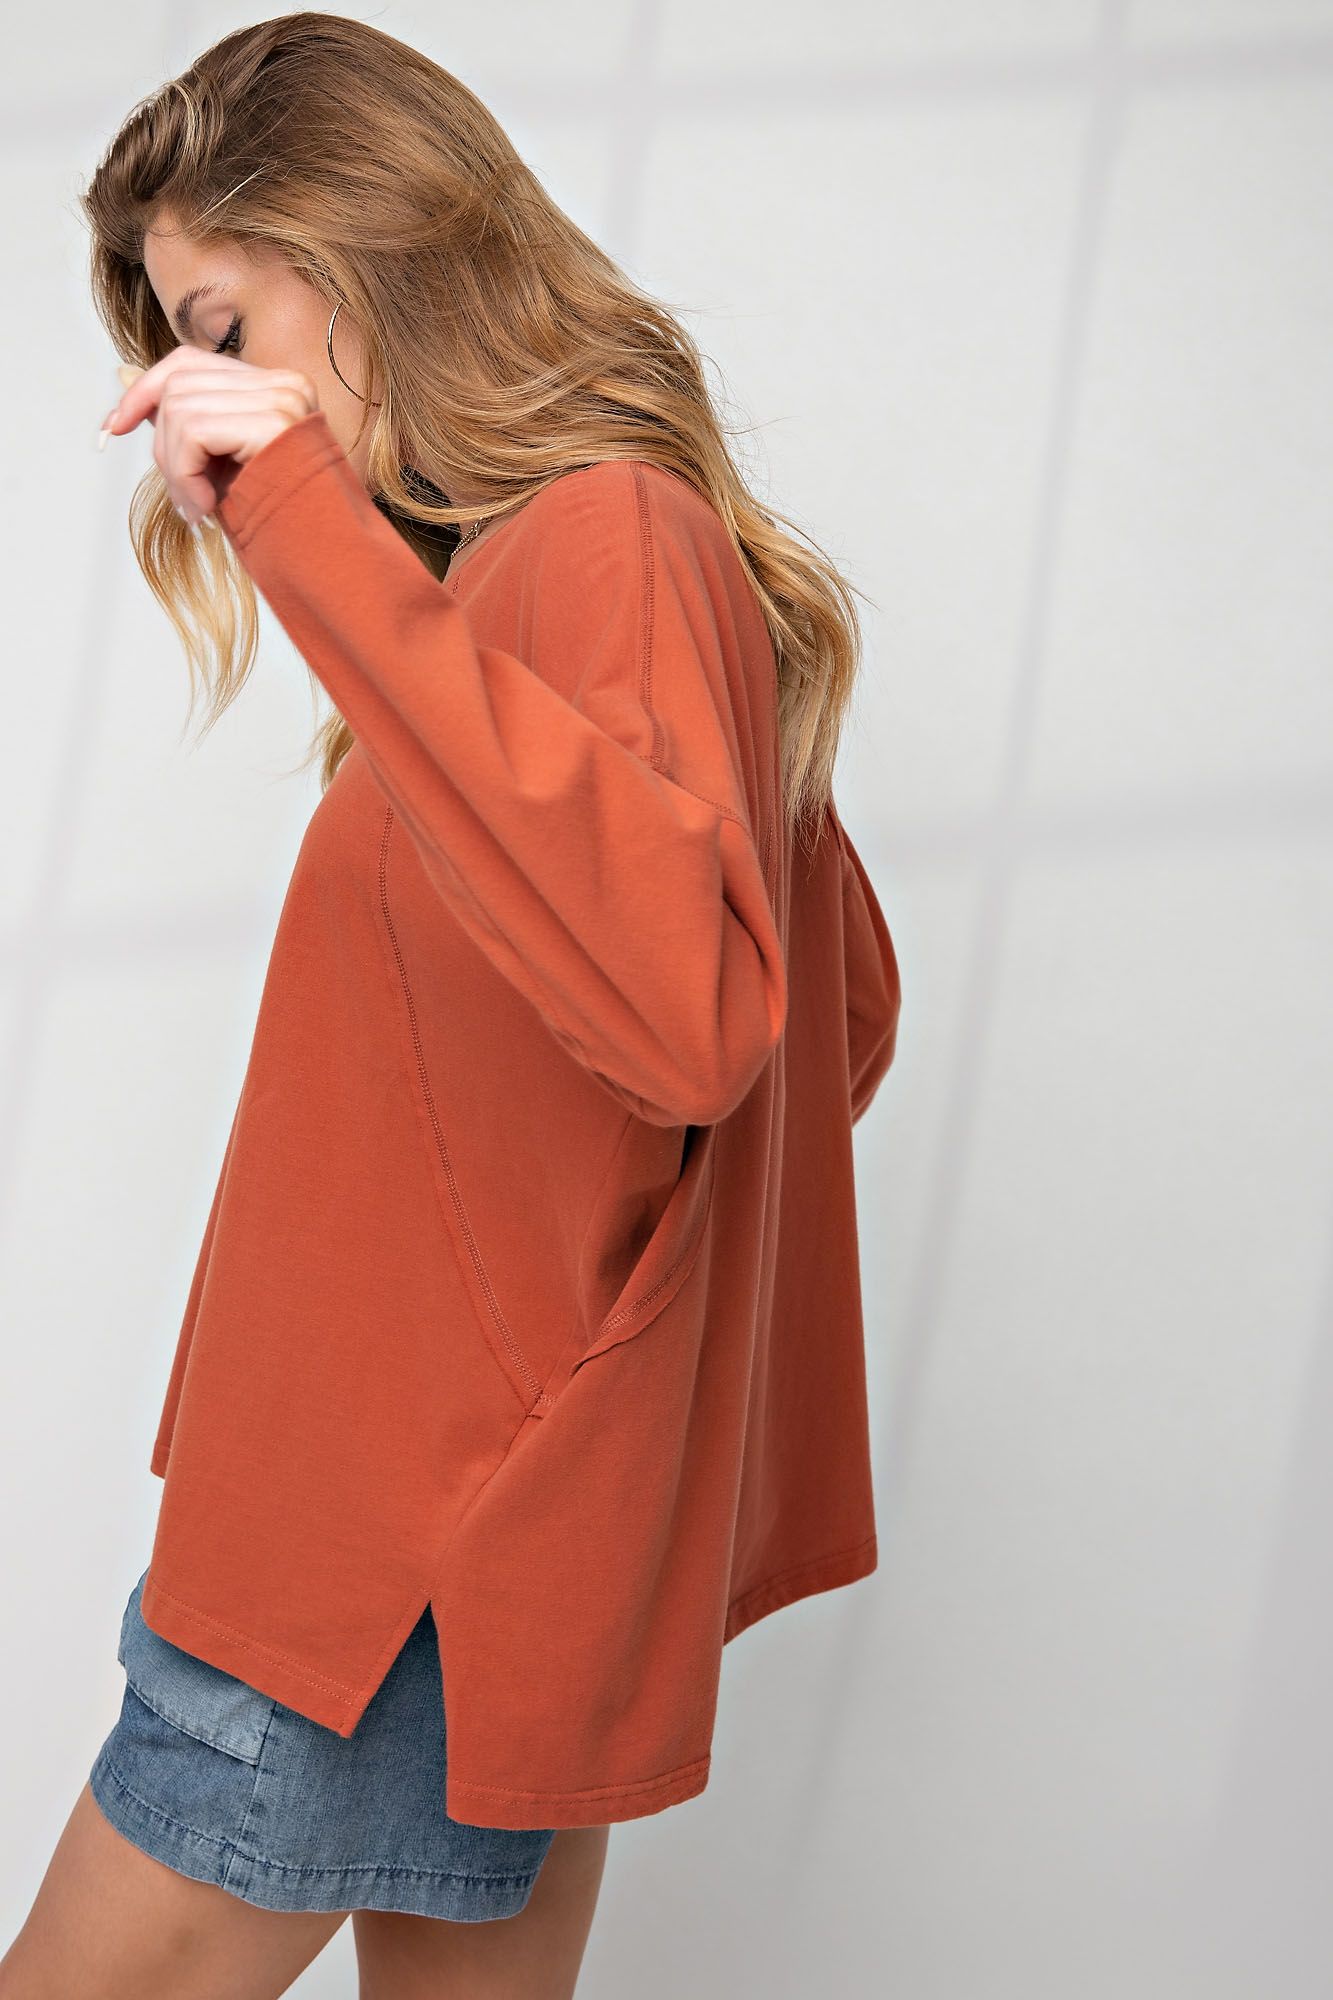 Easel Exposed Seam Long Sleeve Cotton Jersey Boxy Knit Oversized Top - Roulhac Fashion Boutique